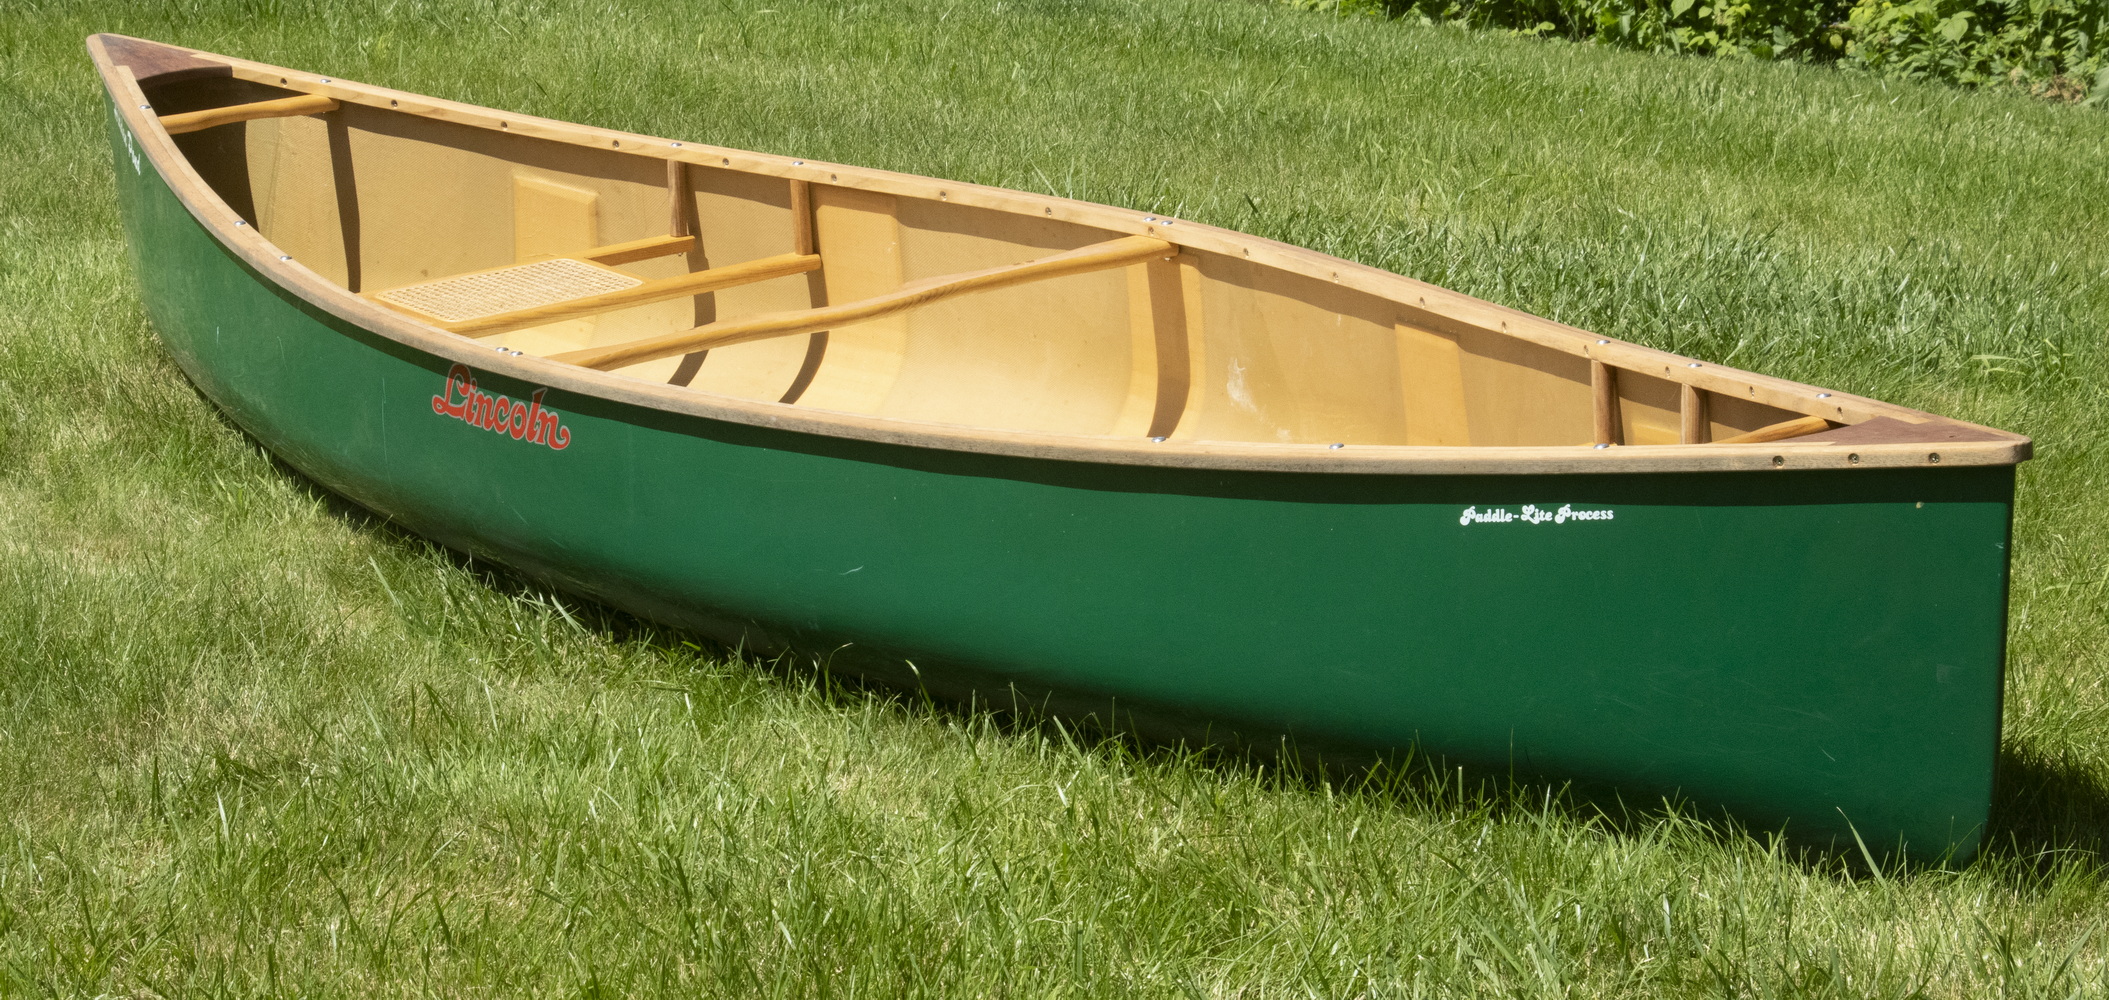 OLD TOWN "LINCOLN" CANOE A 12'